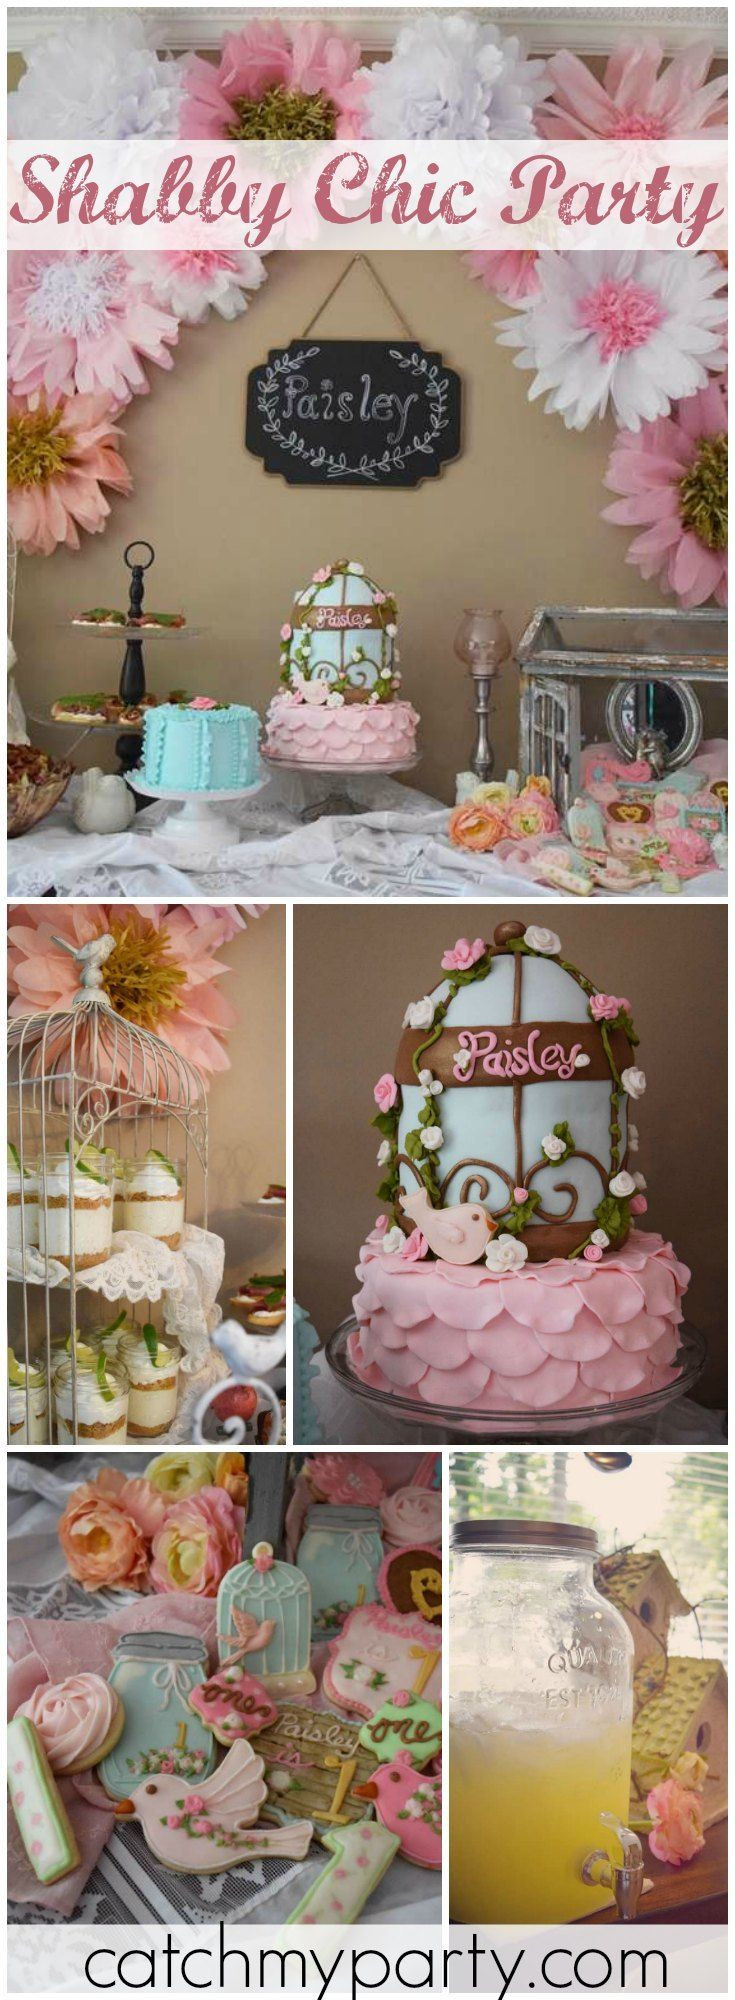 Shabby Chic Birthday Party Decorations
 512 best Shabby Chic Party Ideas images on Pinterest